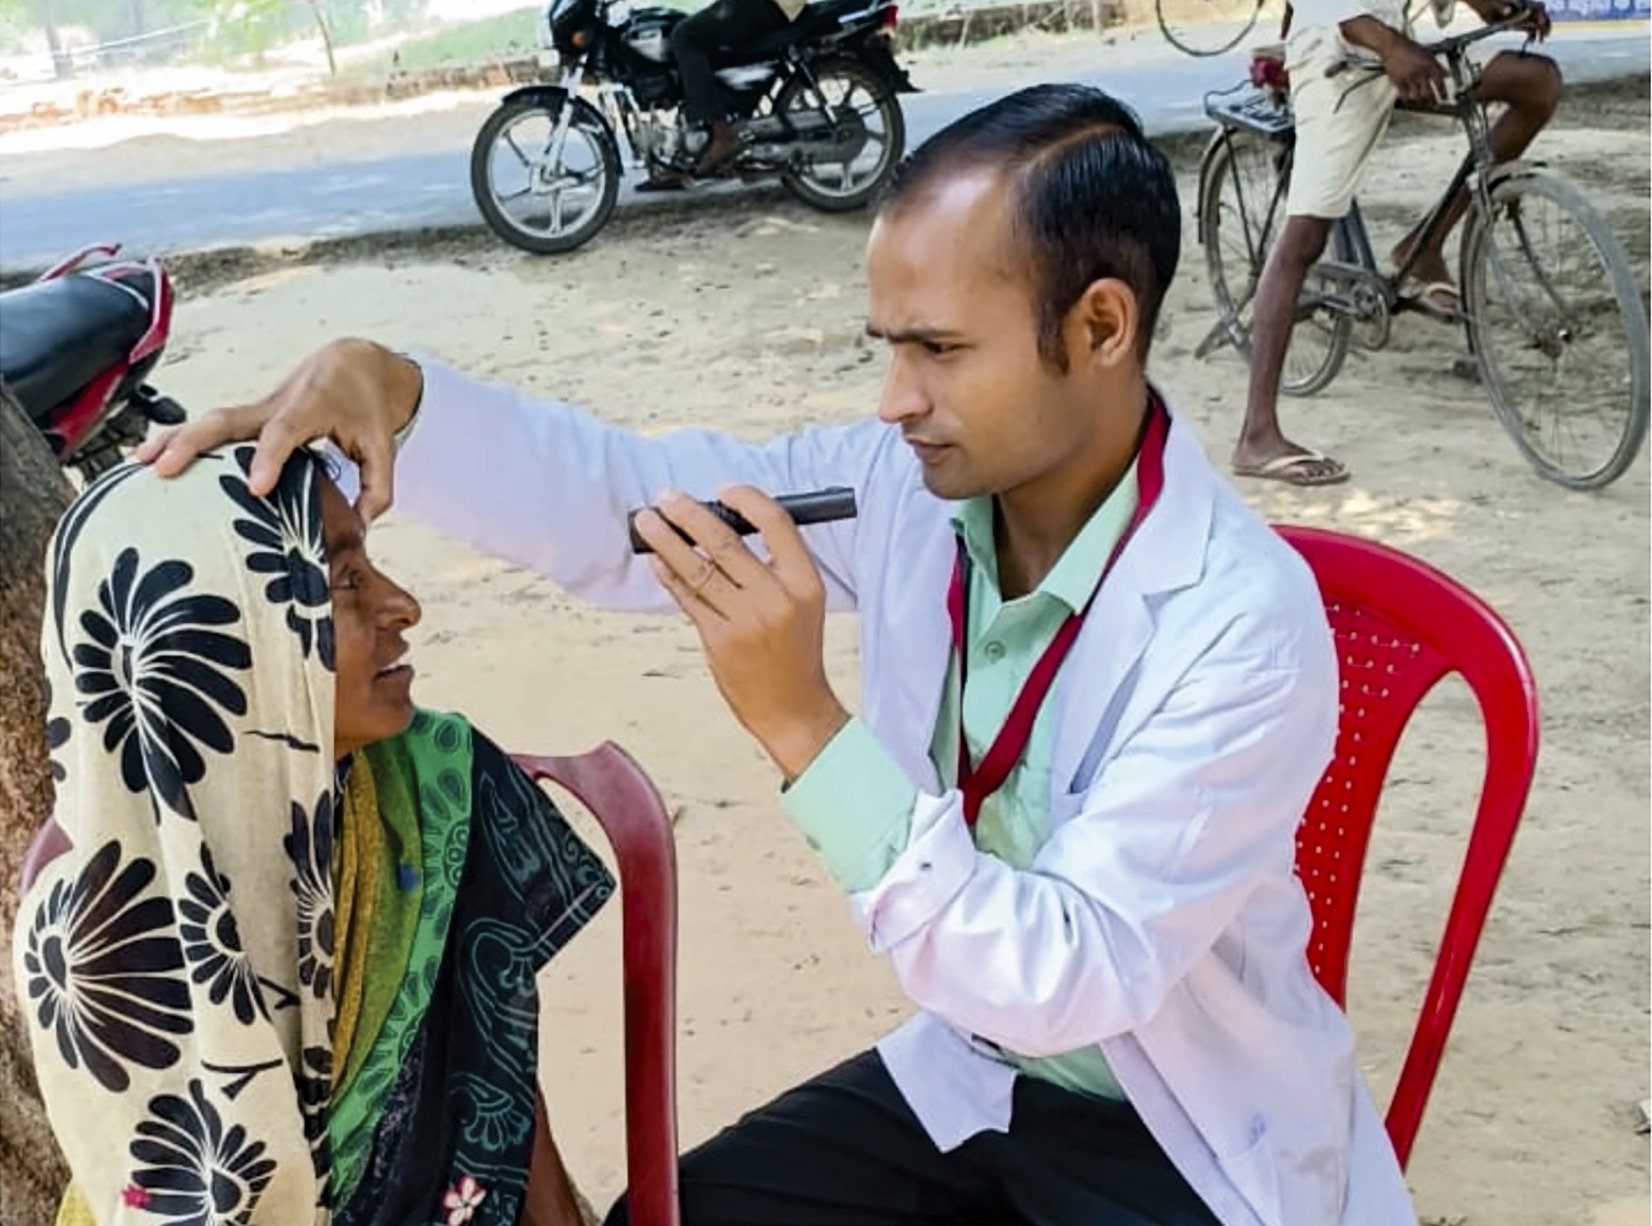 Outreach services improve access to eye care for women, children, and disabled people, India. (Photo: Raju/Sitapur Eye Hospital CC BY-NC-SA 4.0)